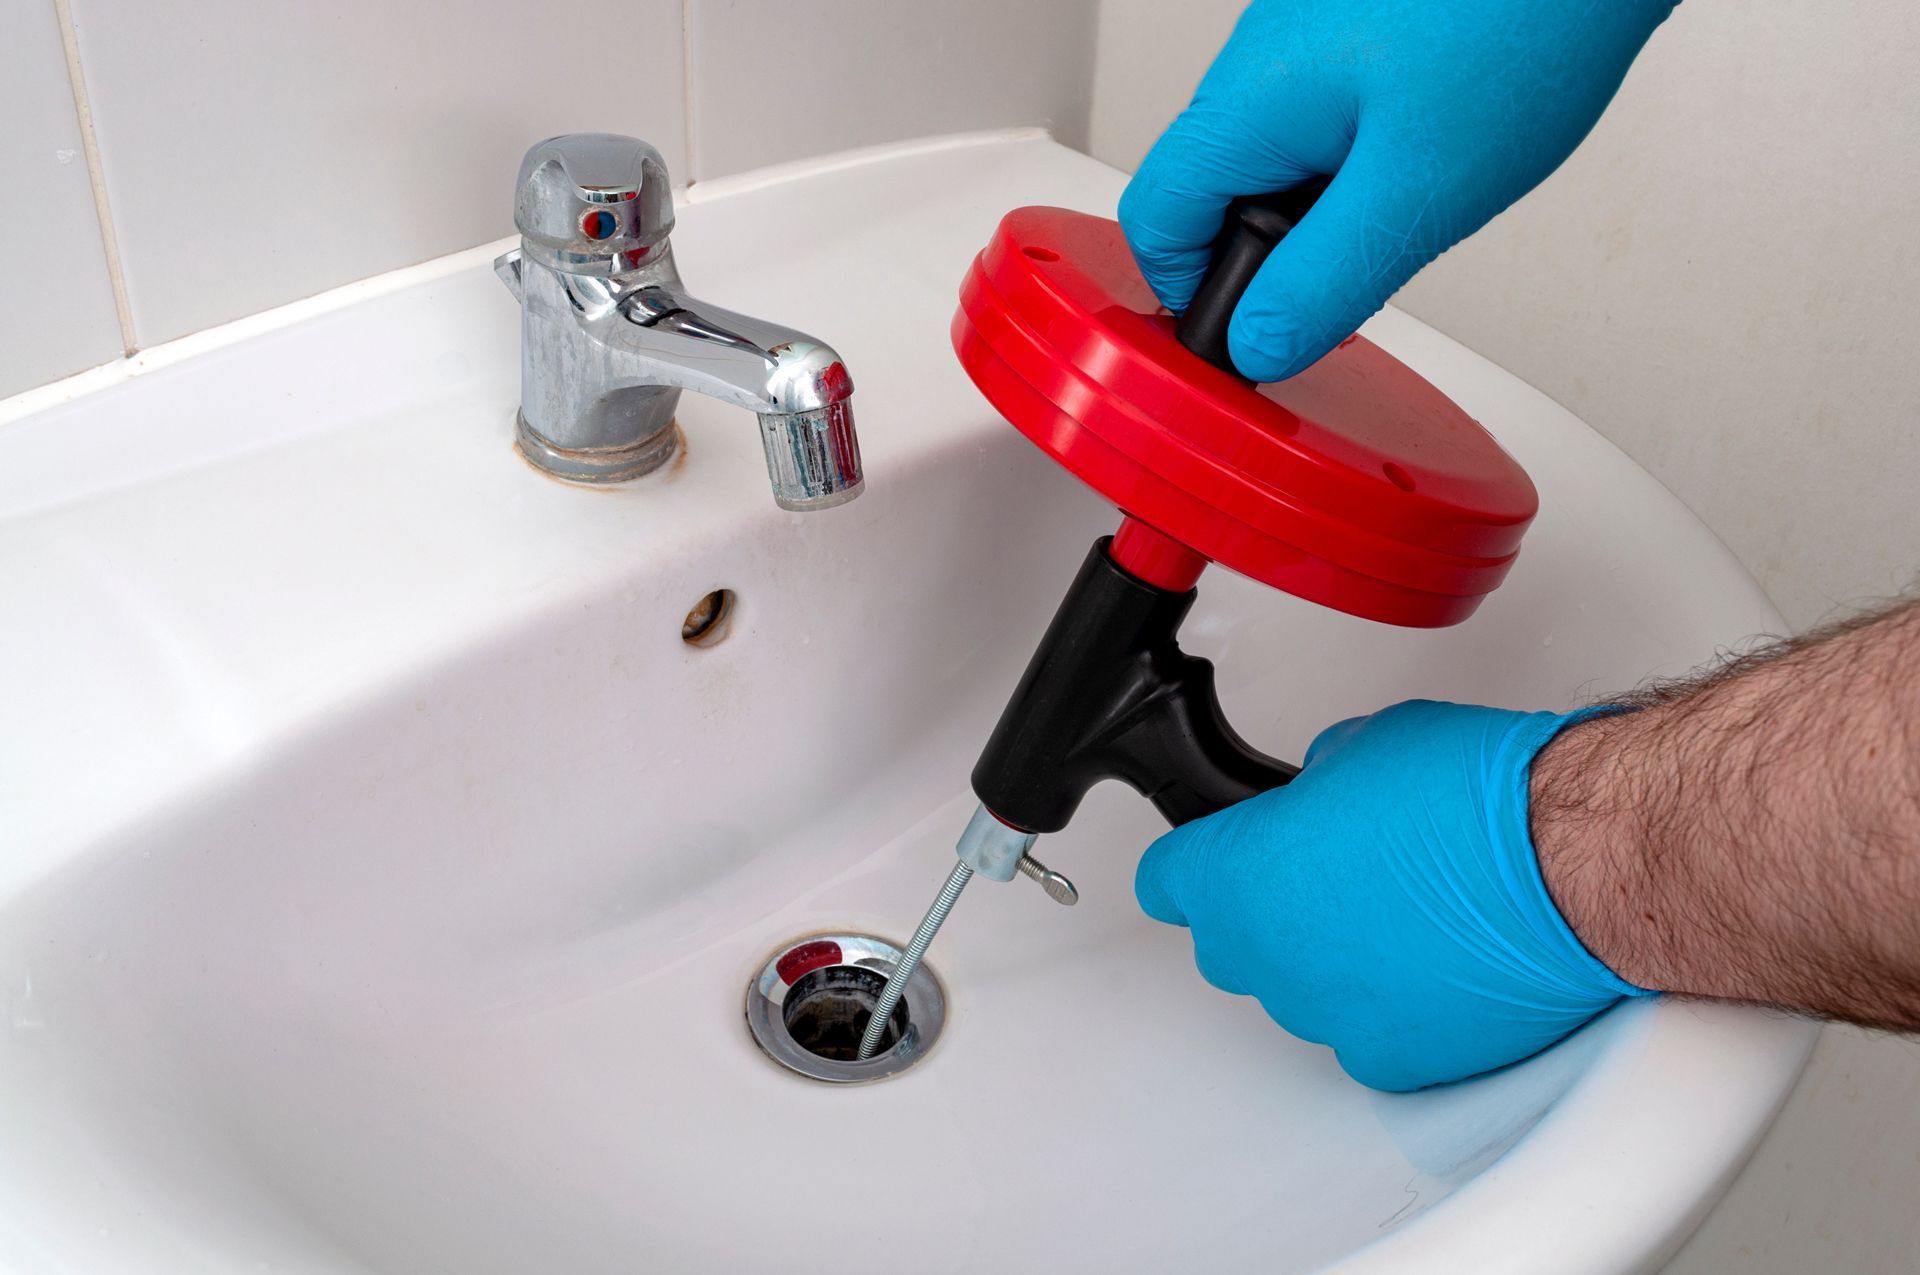 A person is using a drain snake to clean a sink